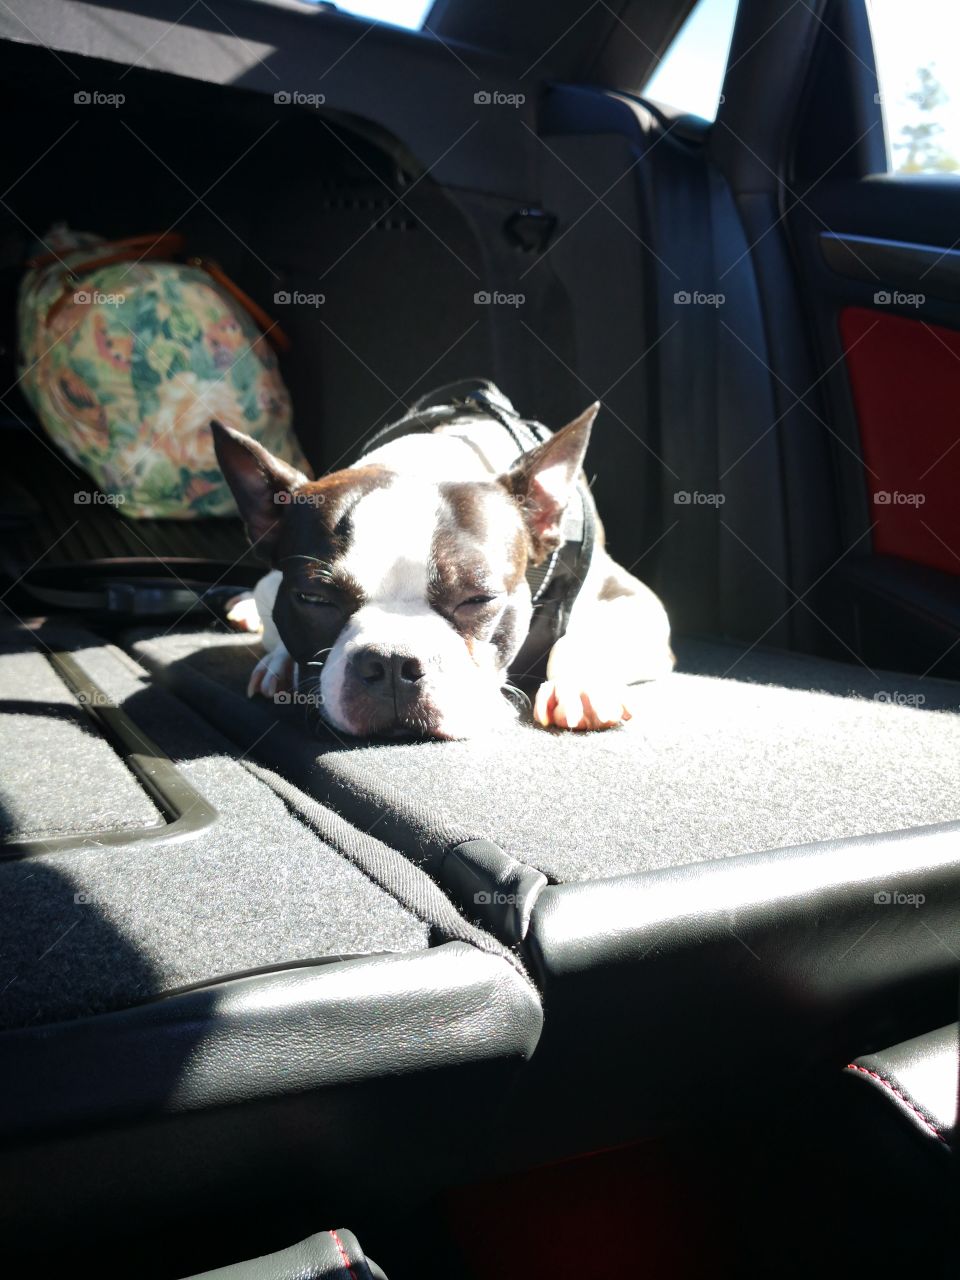 bozo the Boston Terrier loves going on road trips even long ones, he lives for adventures!